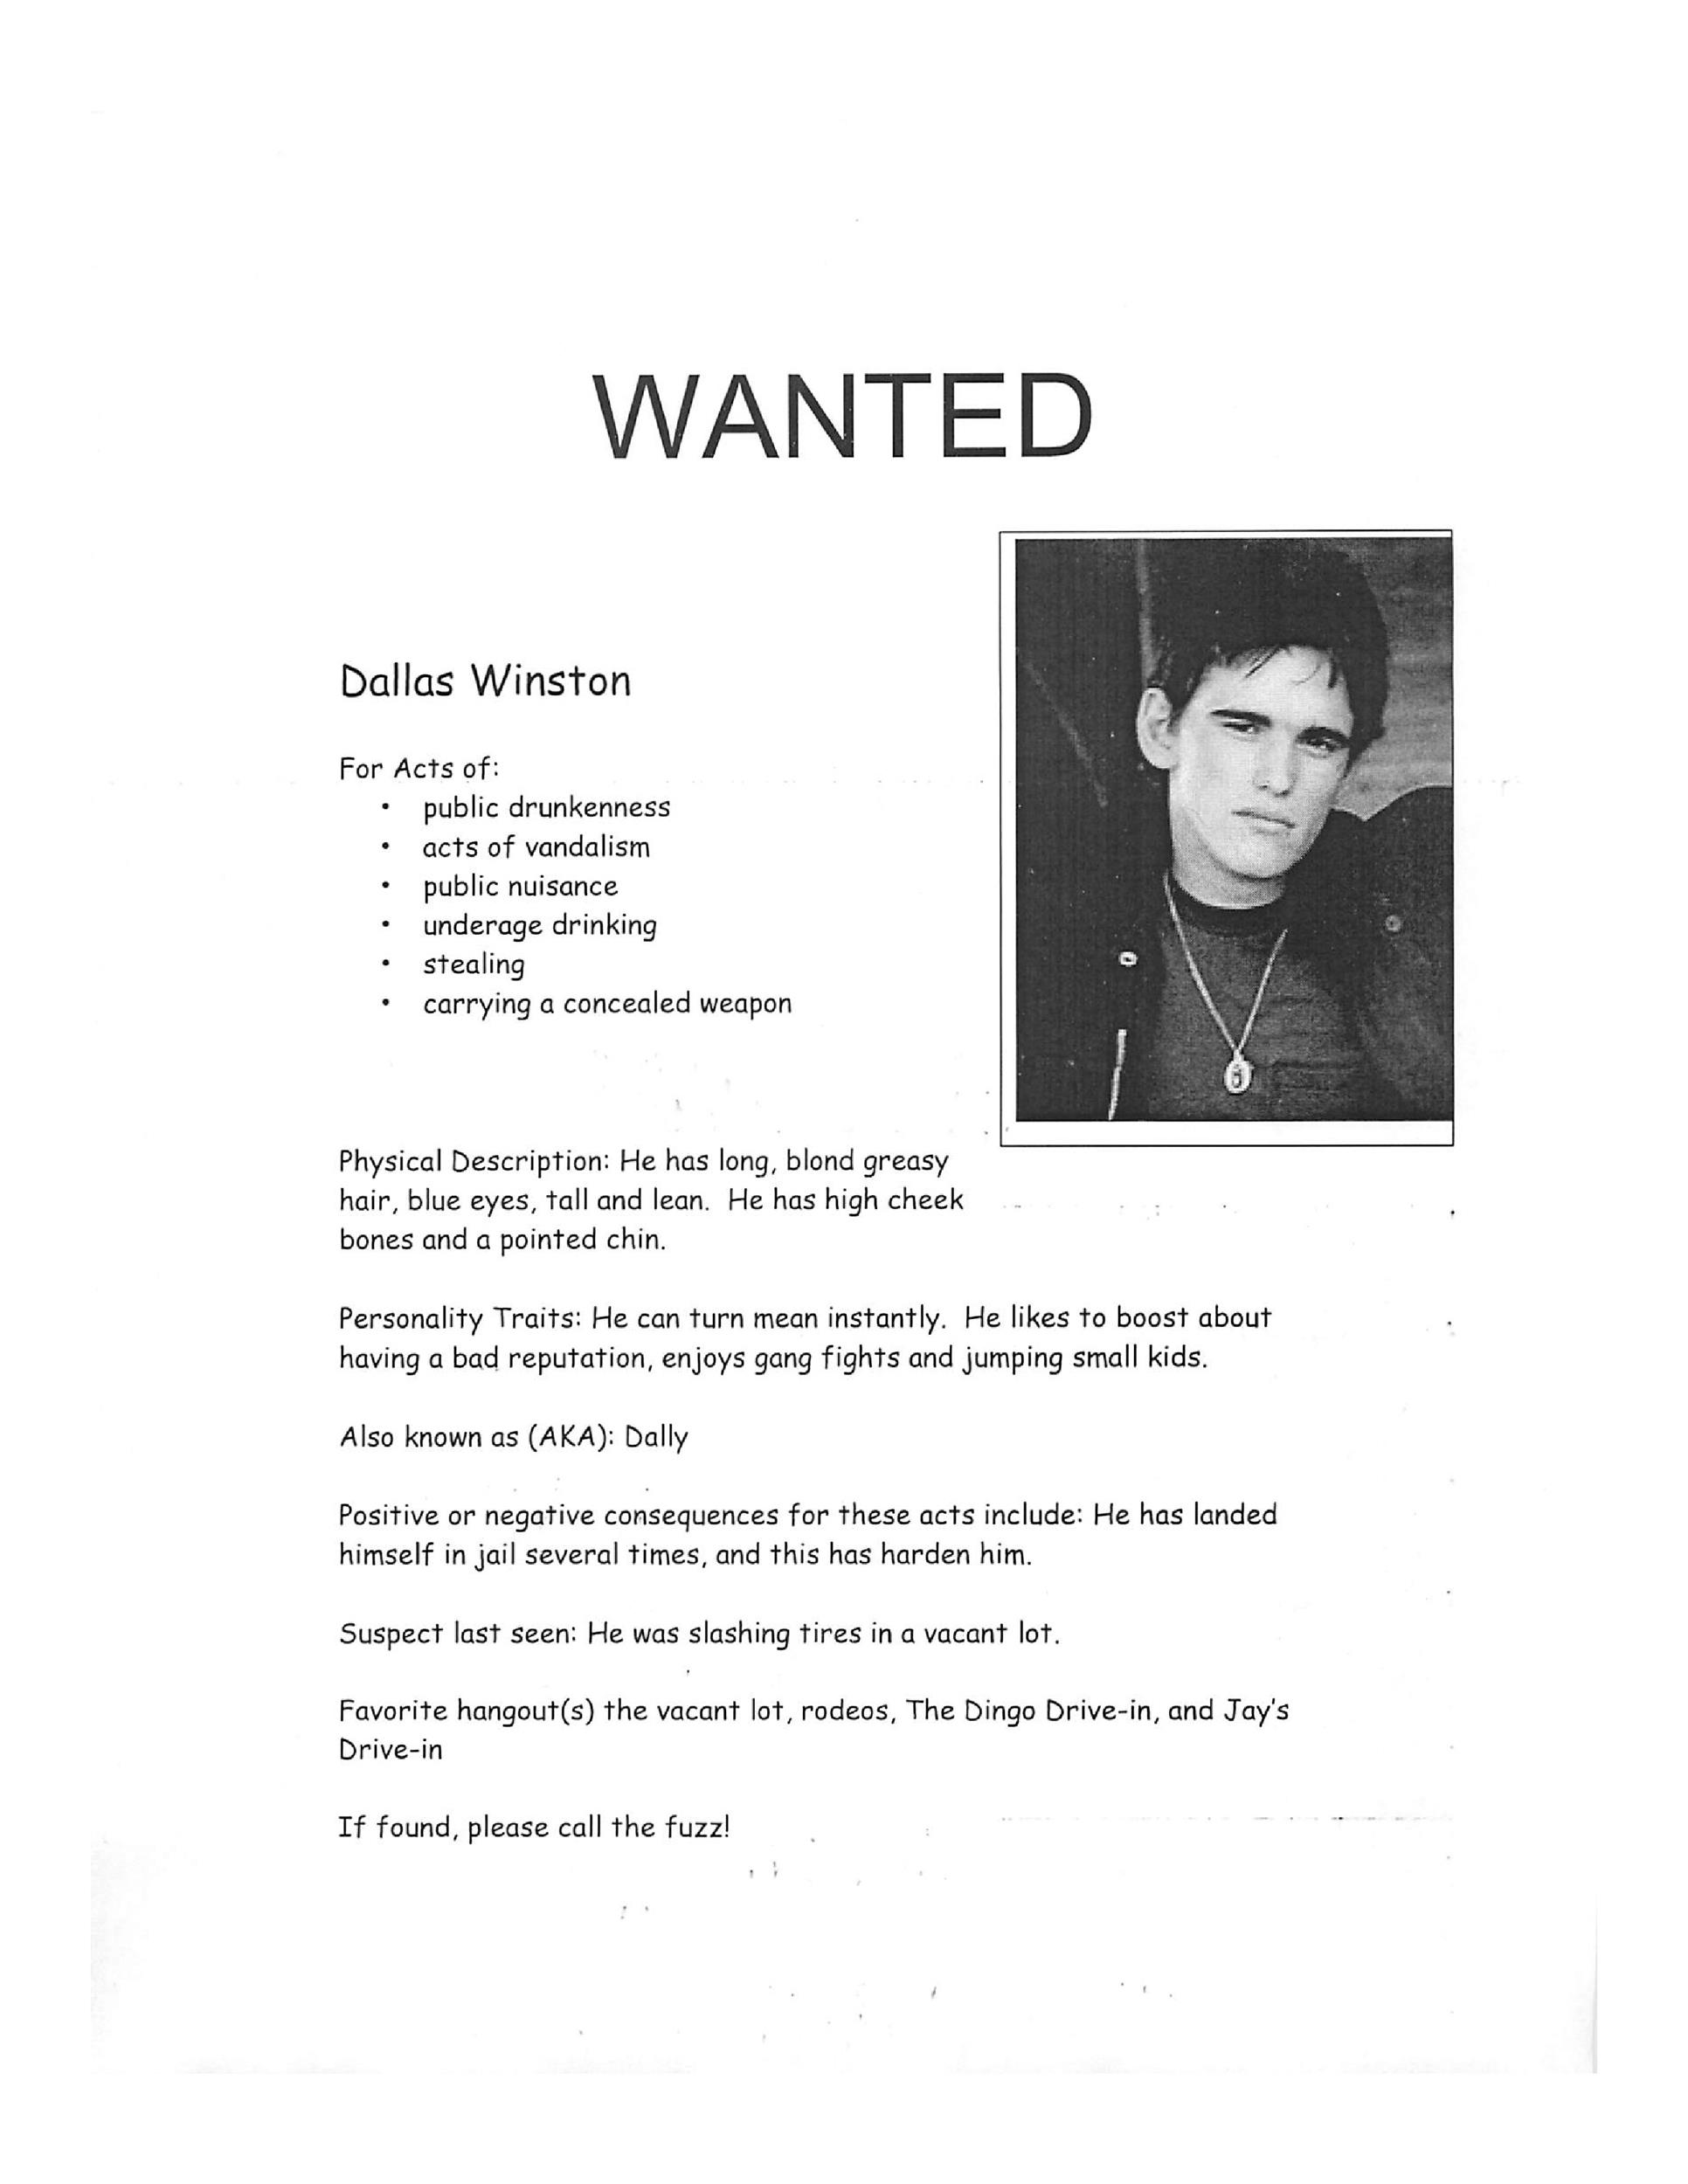 29 FREE Wanted Poster Templates (FBI and Old West)
 Example Of A Wanted Poster